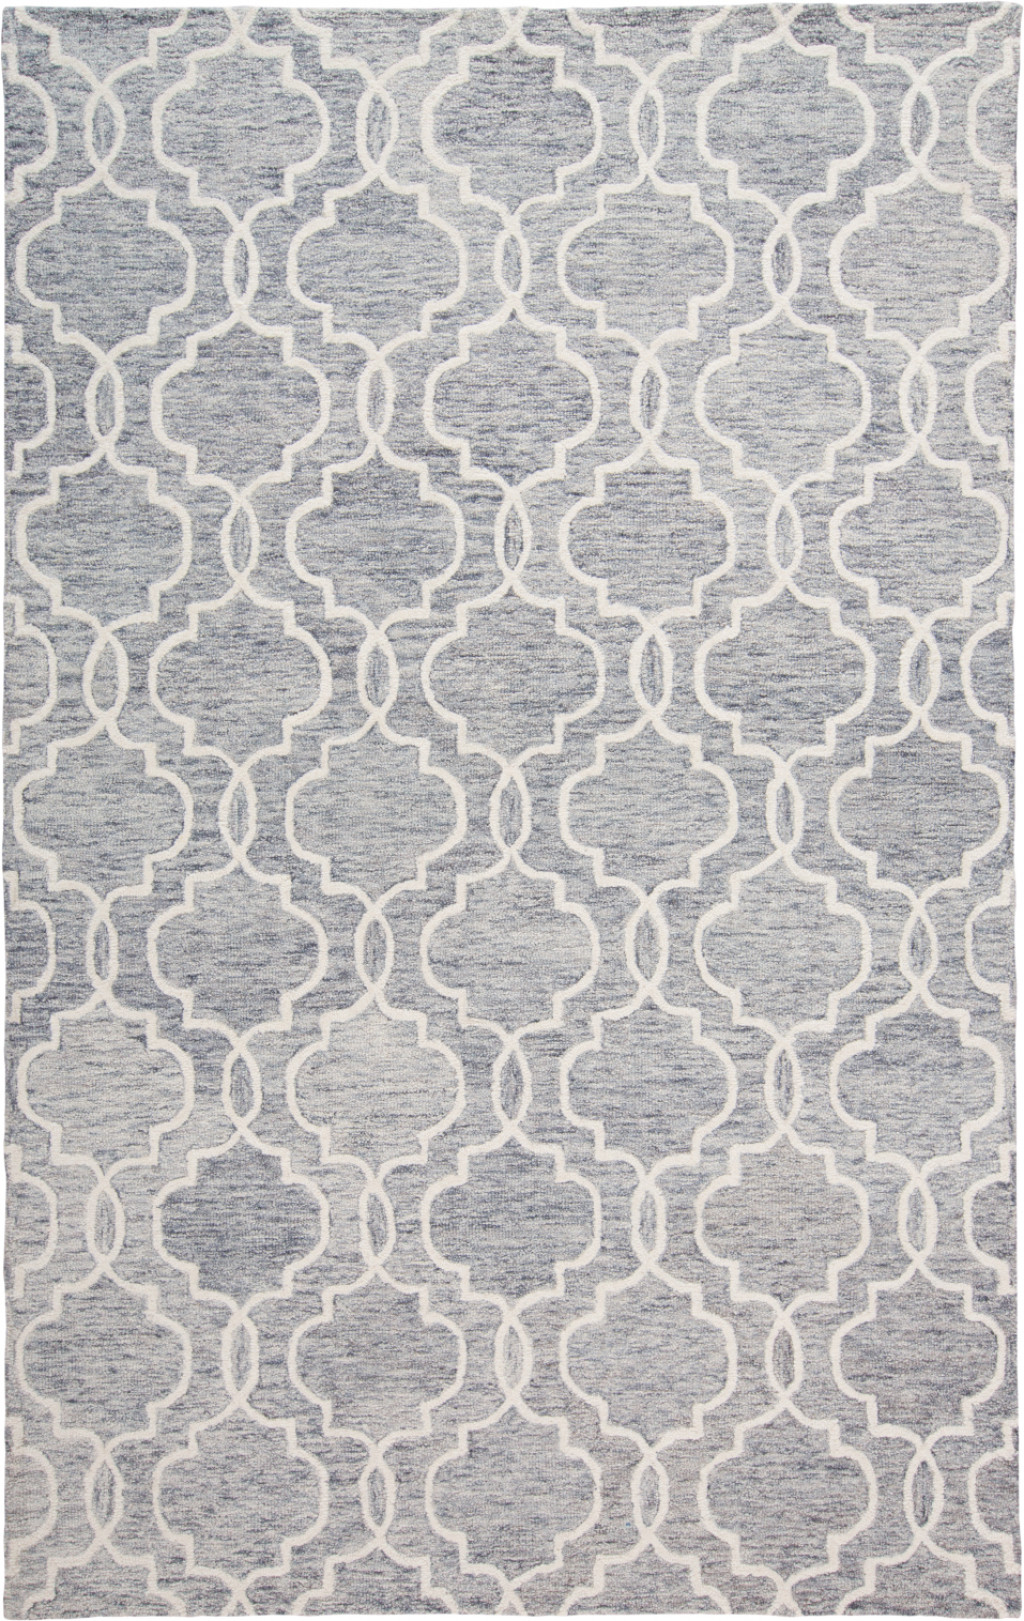 2' X 3' Blue Gray And Ivory Wool Geometric Tufted Handmade Stain Resistant Area Rug-512187-1